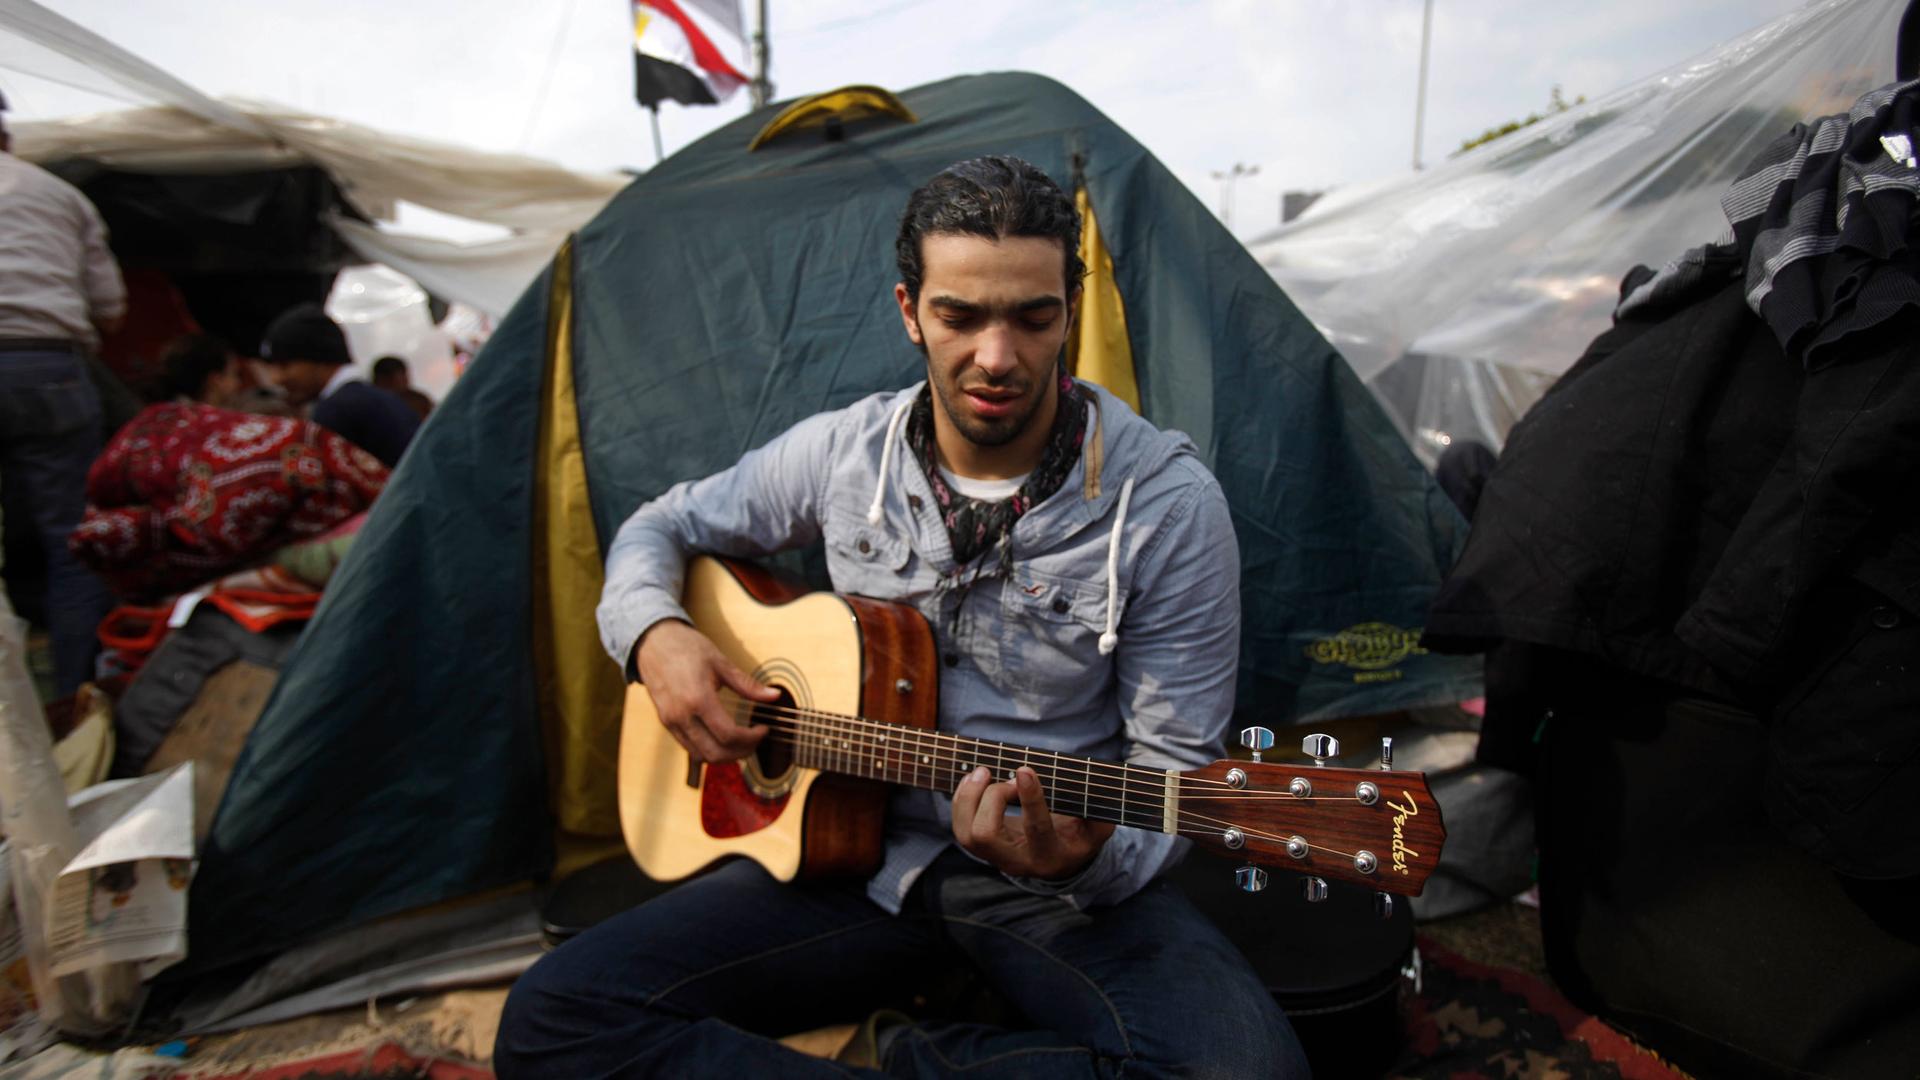 A man is sitting cross-legged in front of a tent and holding a guitar.